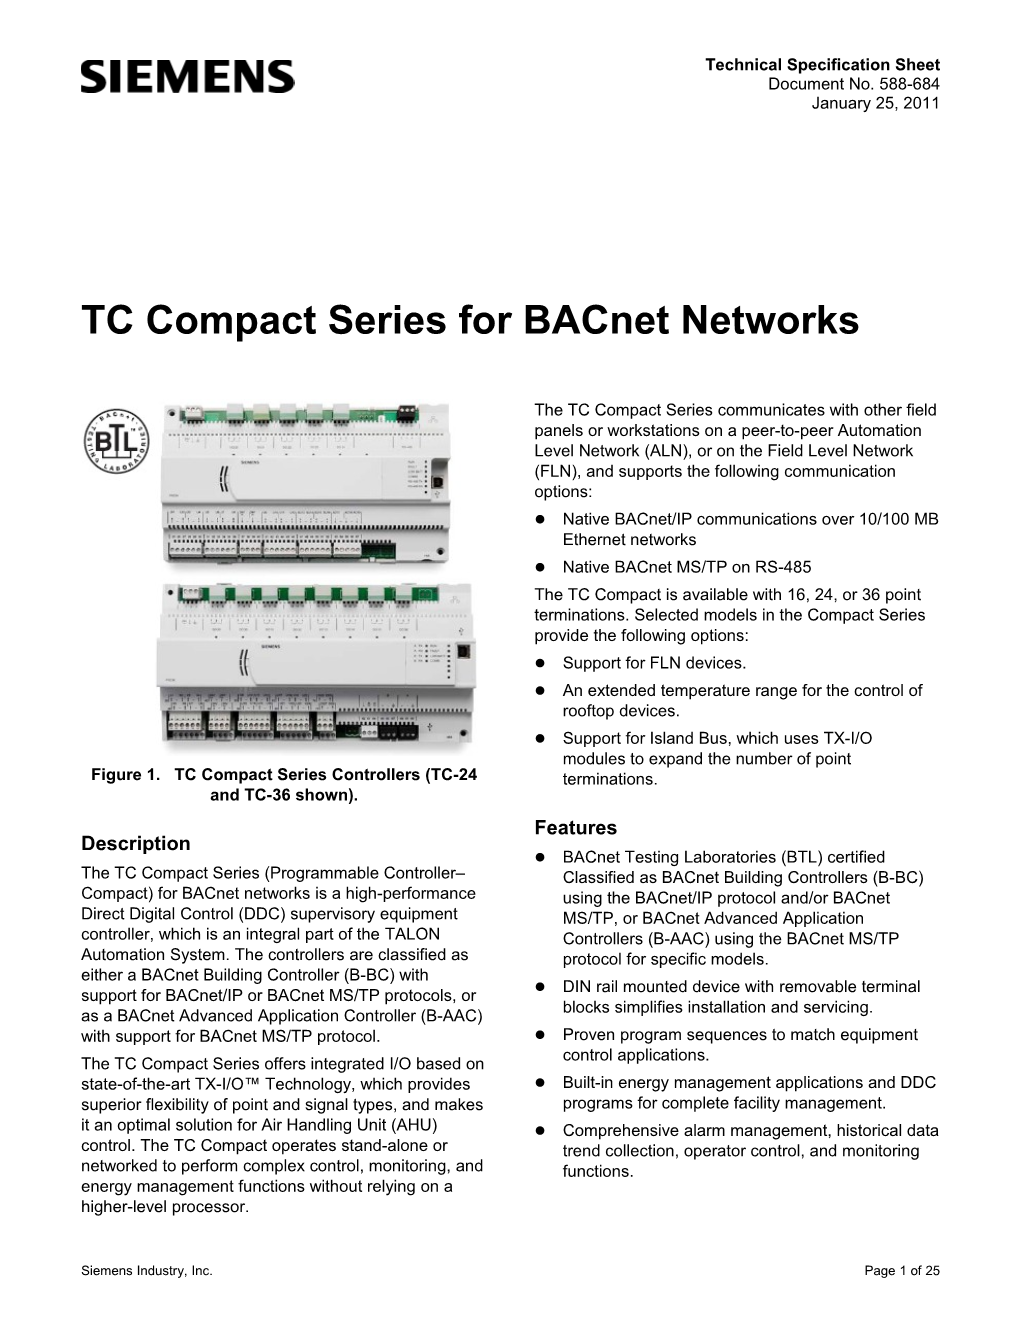 TC Compact Series for Bacnet Networks